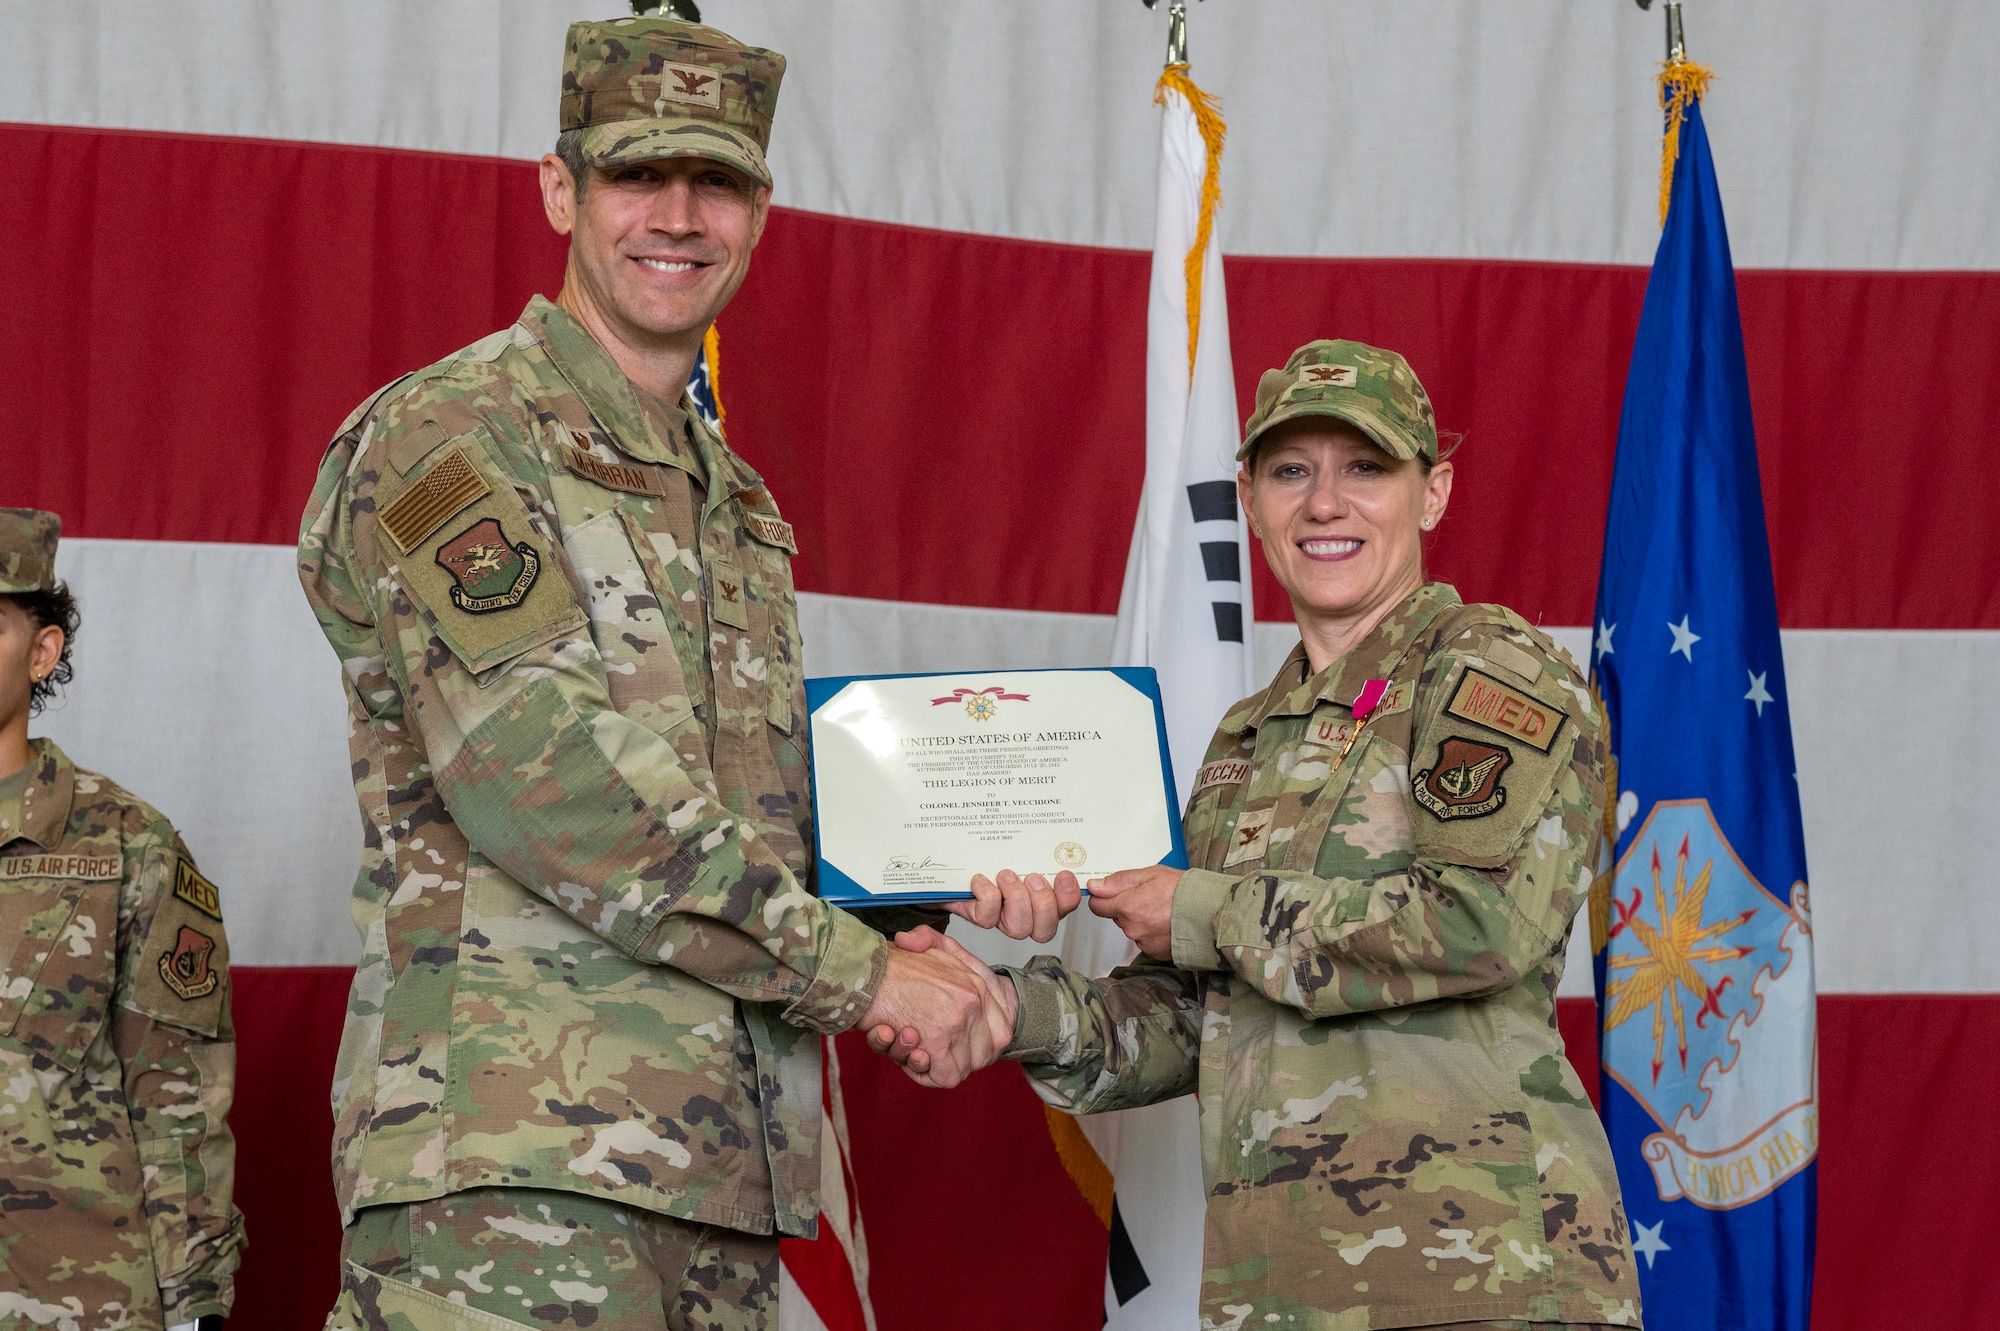 U.S. Air Force Col. William McKibban, left, 51st Fighter Wing commander, presents a Meritorious Service Medal (MSM) to Col. Jennifer Vecchione, 51st Medical Group outgoing commander, at Osan Air Base, Republic of Korea, July 12, 2023. The MSM is a military decoration awarded by various branches of the Armed Forces to recognize distinguished or outstanding meritorious service. (U.S. Air Force photo by Senior Airman Aaron Edwards)